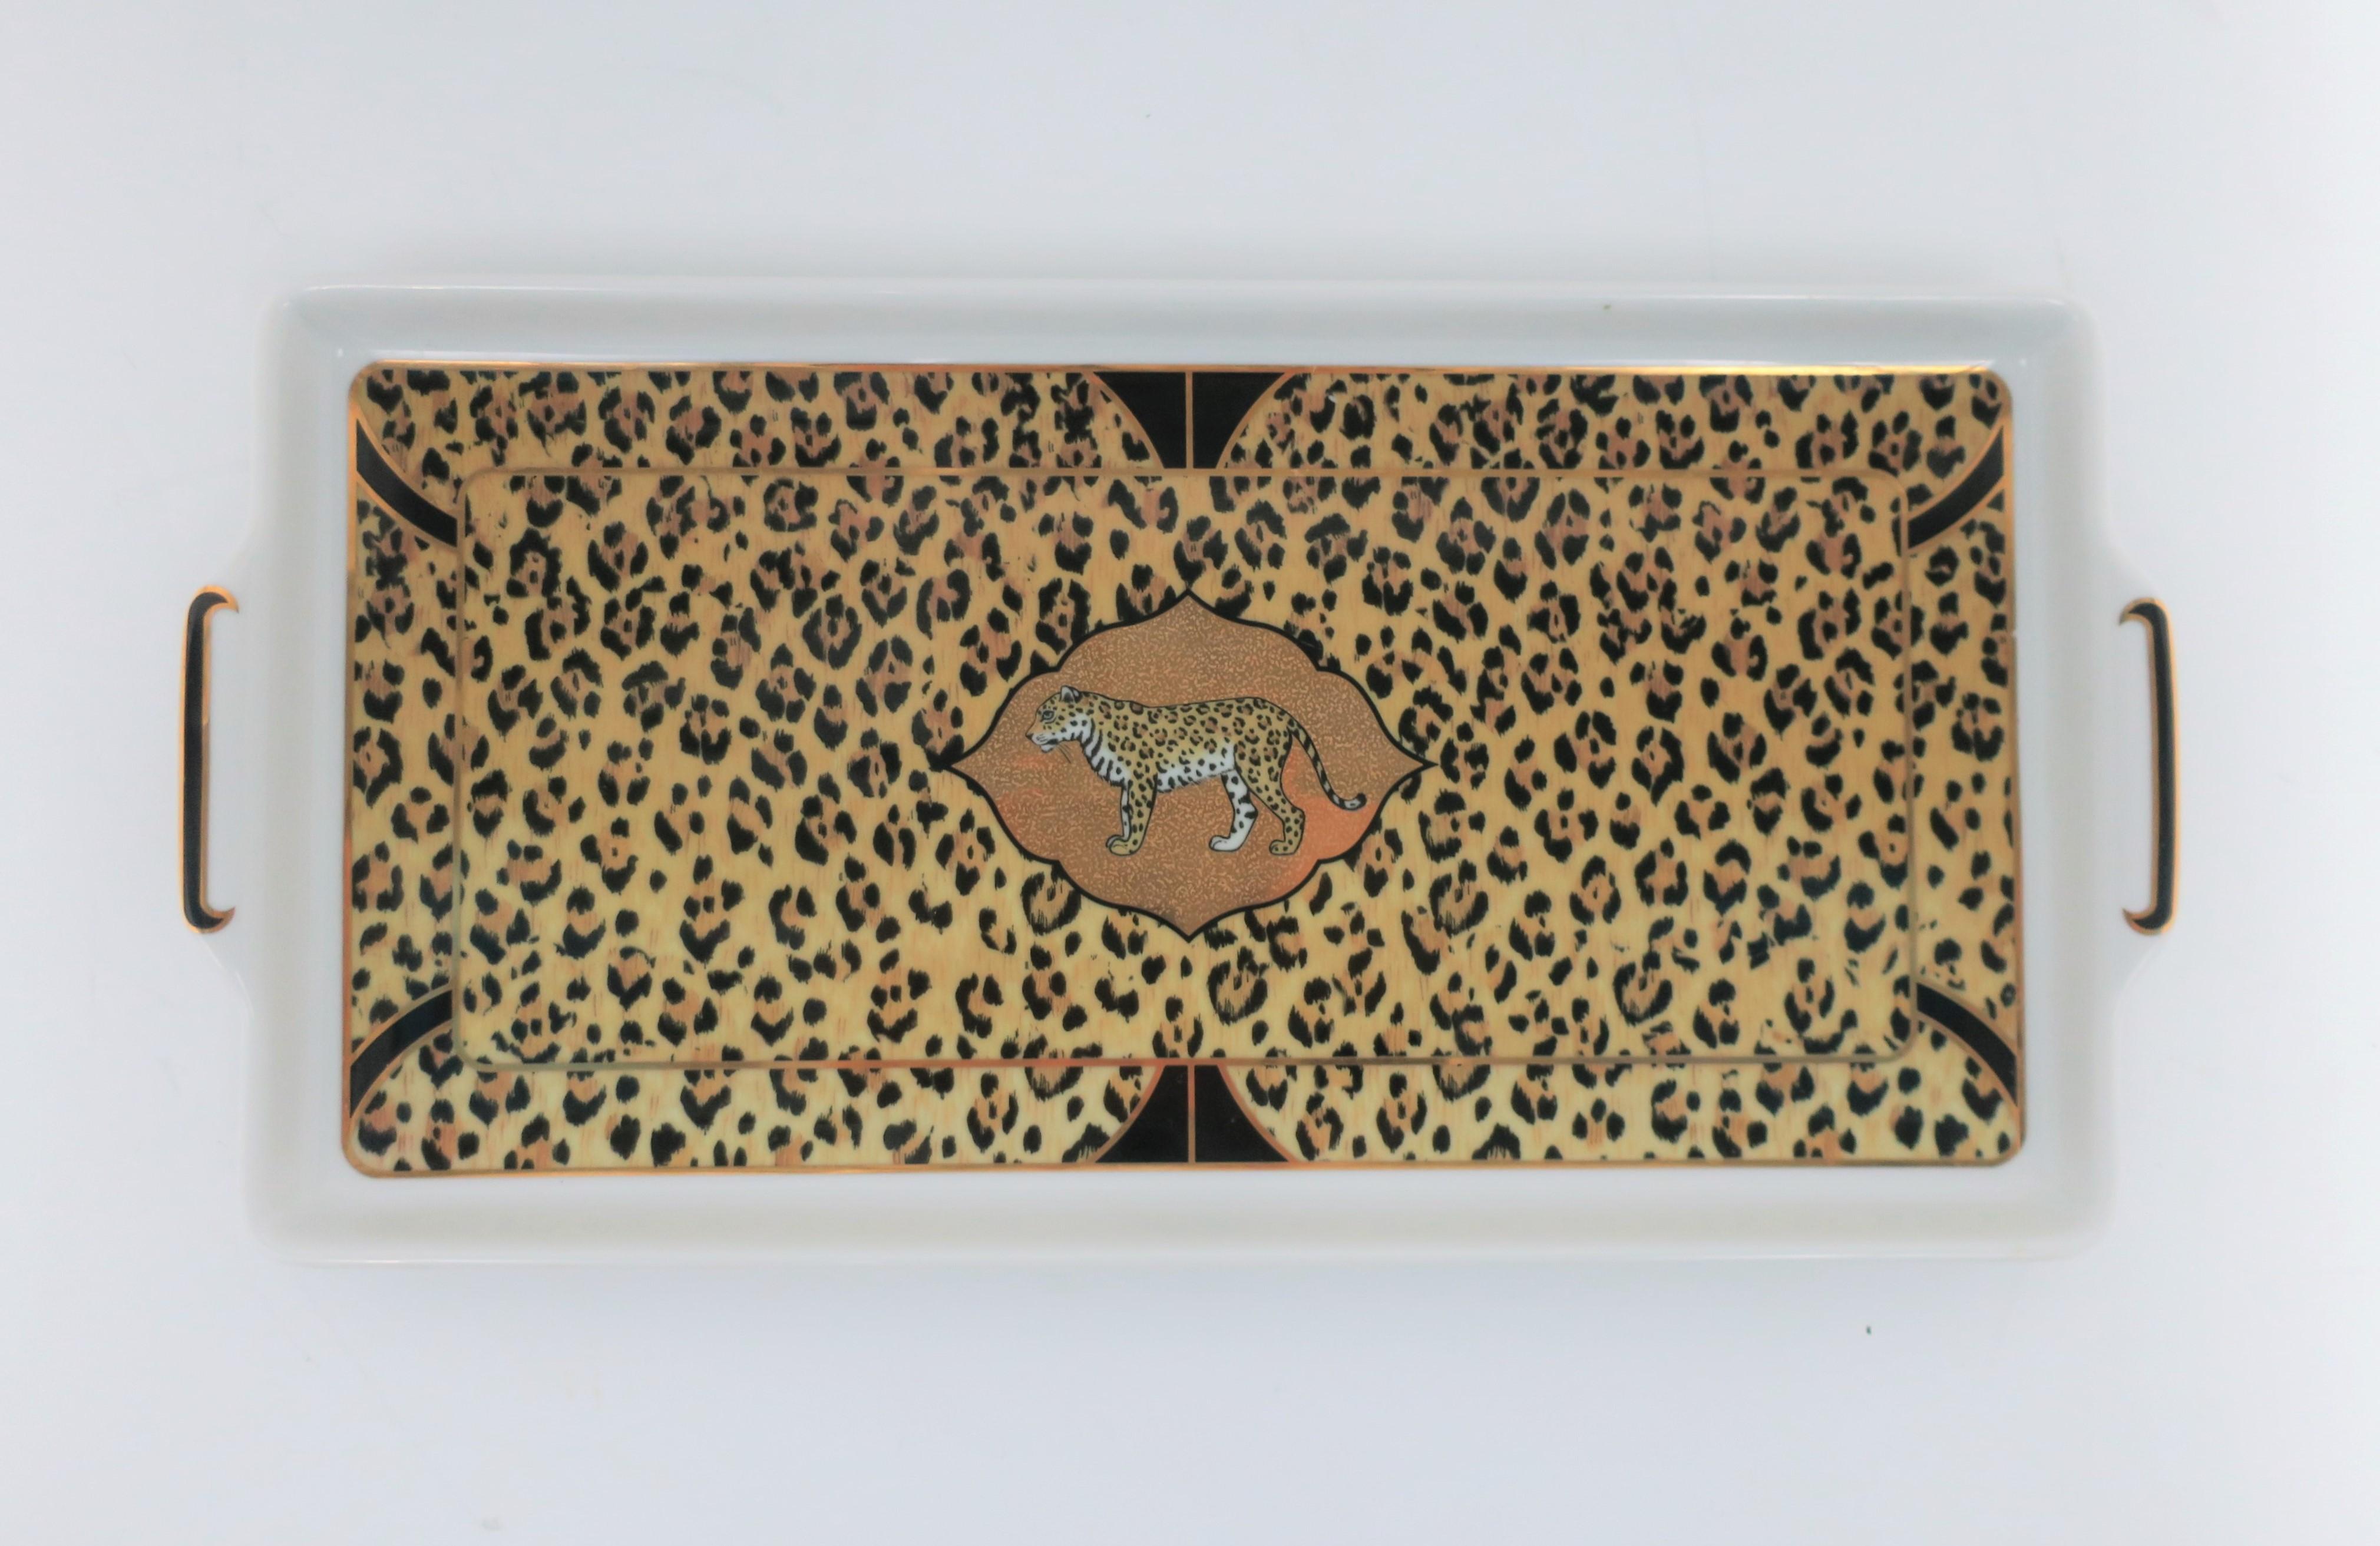 A beautiful '90s black and 24-karart gold designer Leopard tiger cat porcelain rectangular serving tray, circa late-20th century, 1994, in the Art Deco style, by Lynn Chase. Tray can be used in many ways; I'm showing it here as a vanity tray with